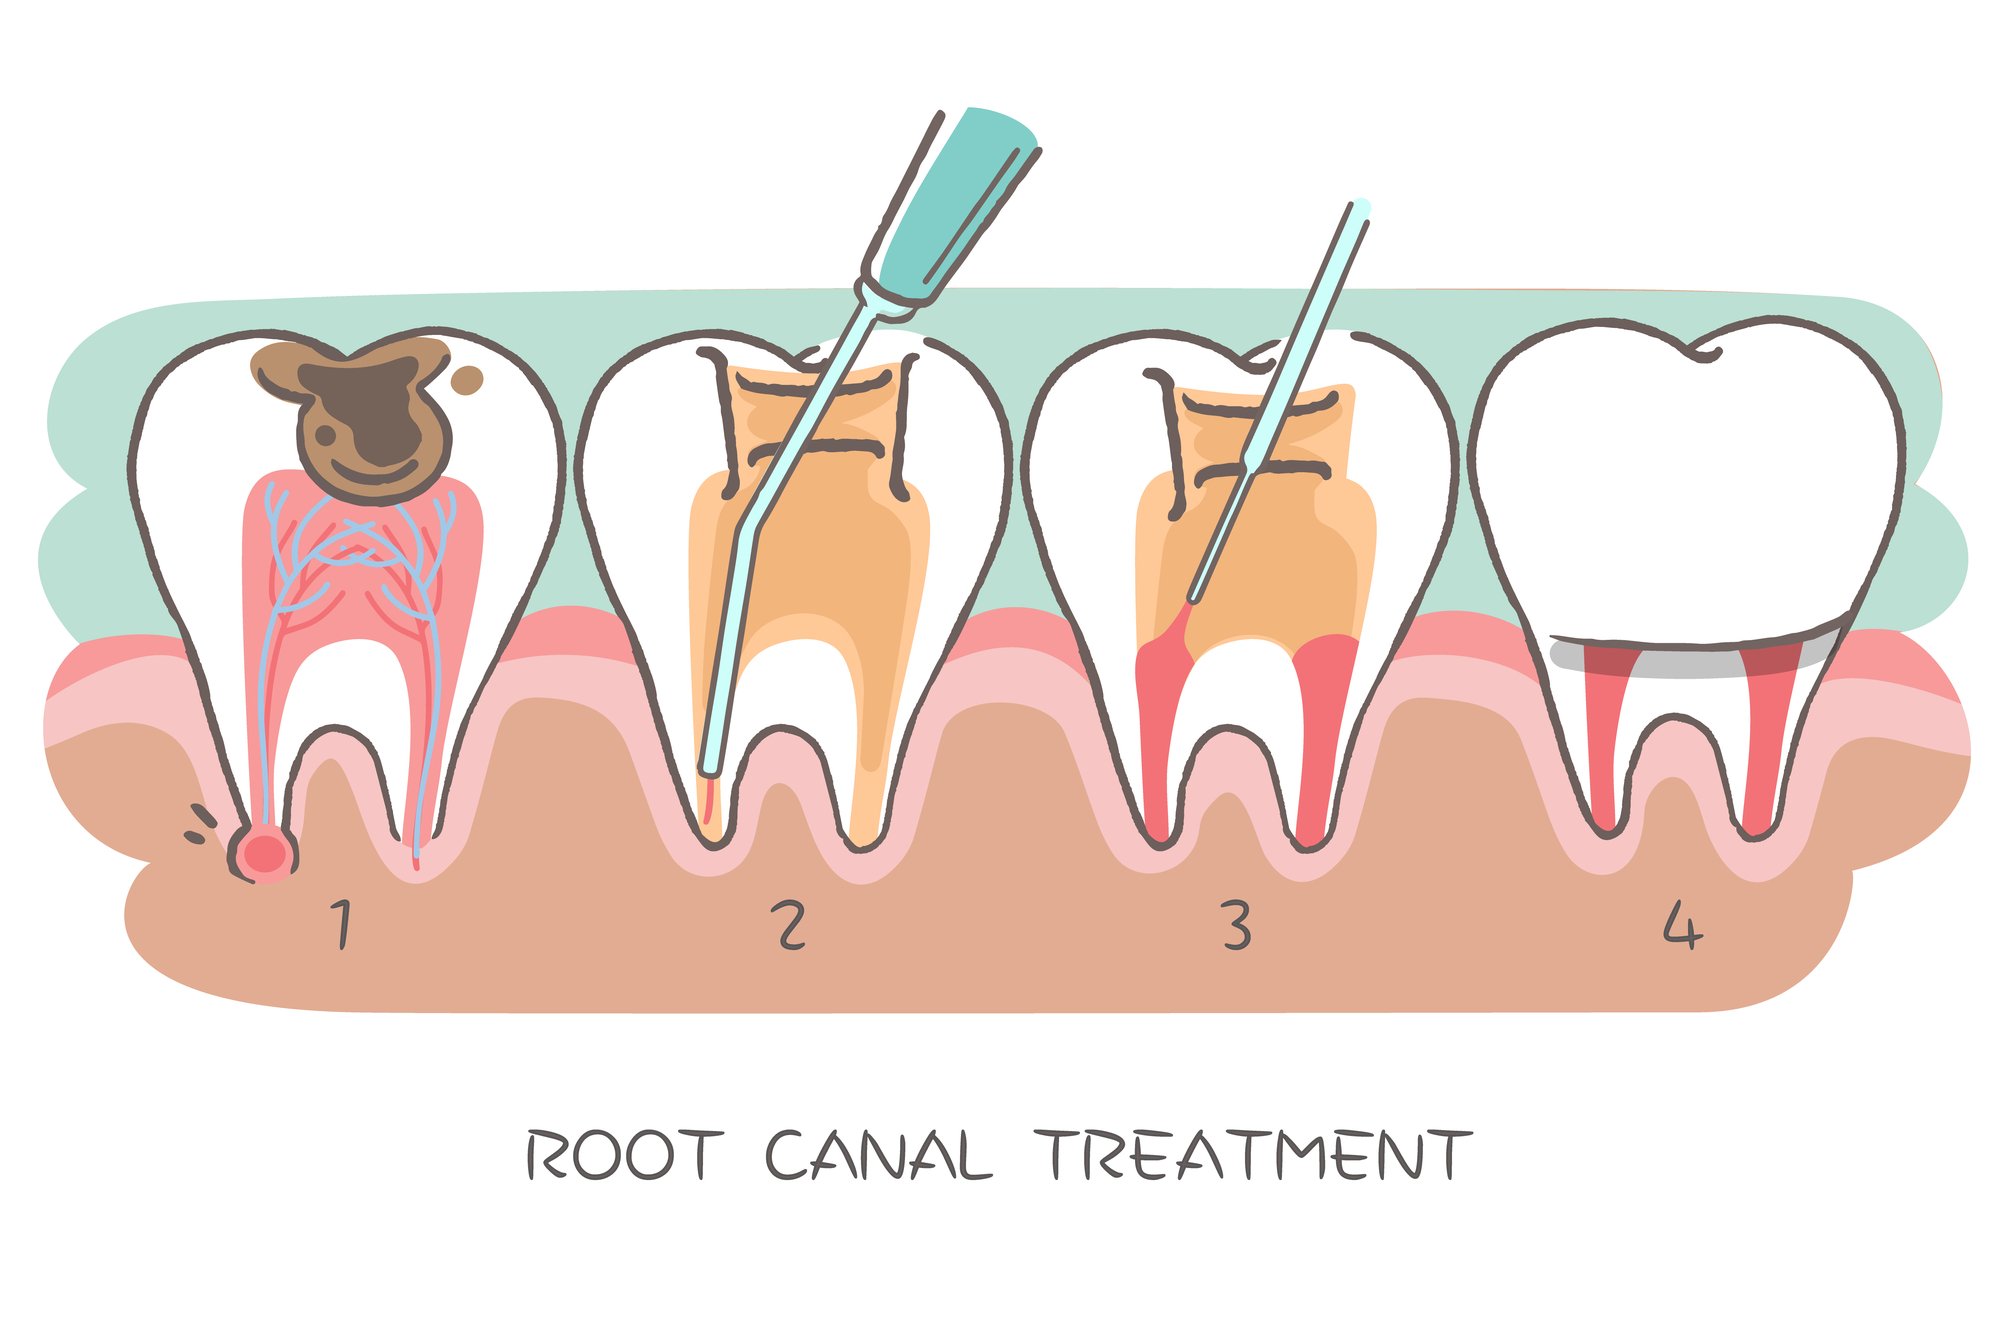 illustration of root canal therapy